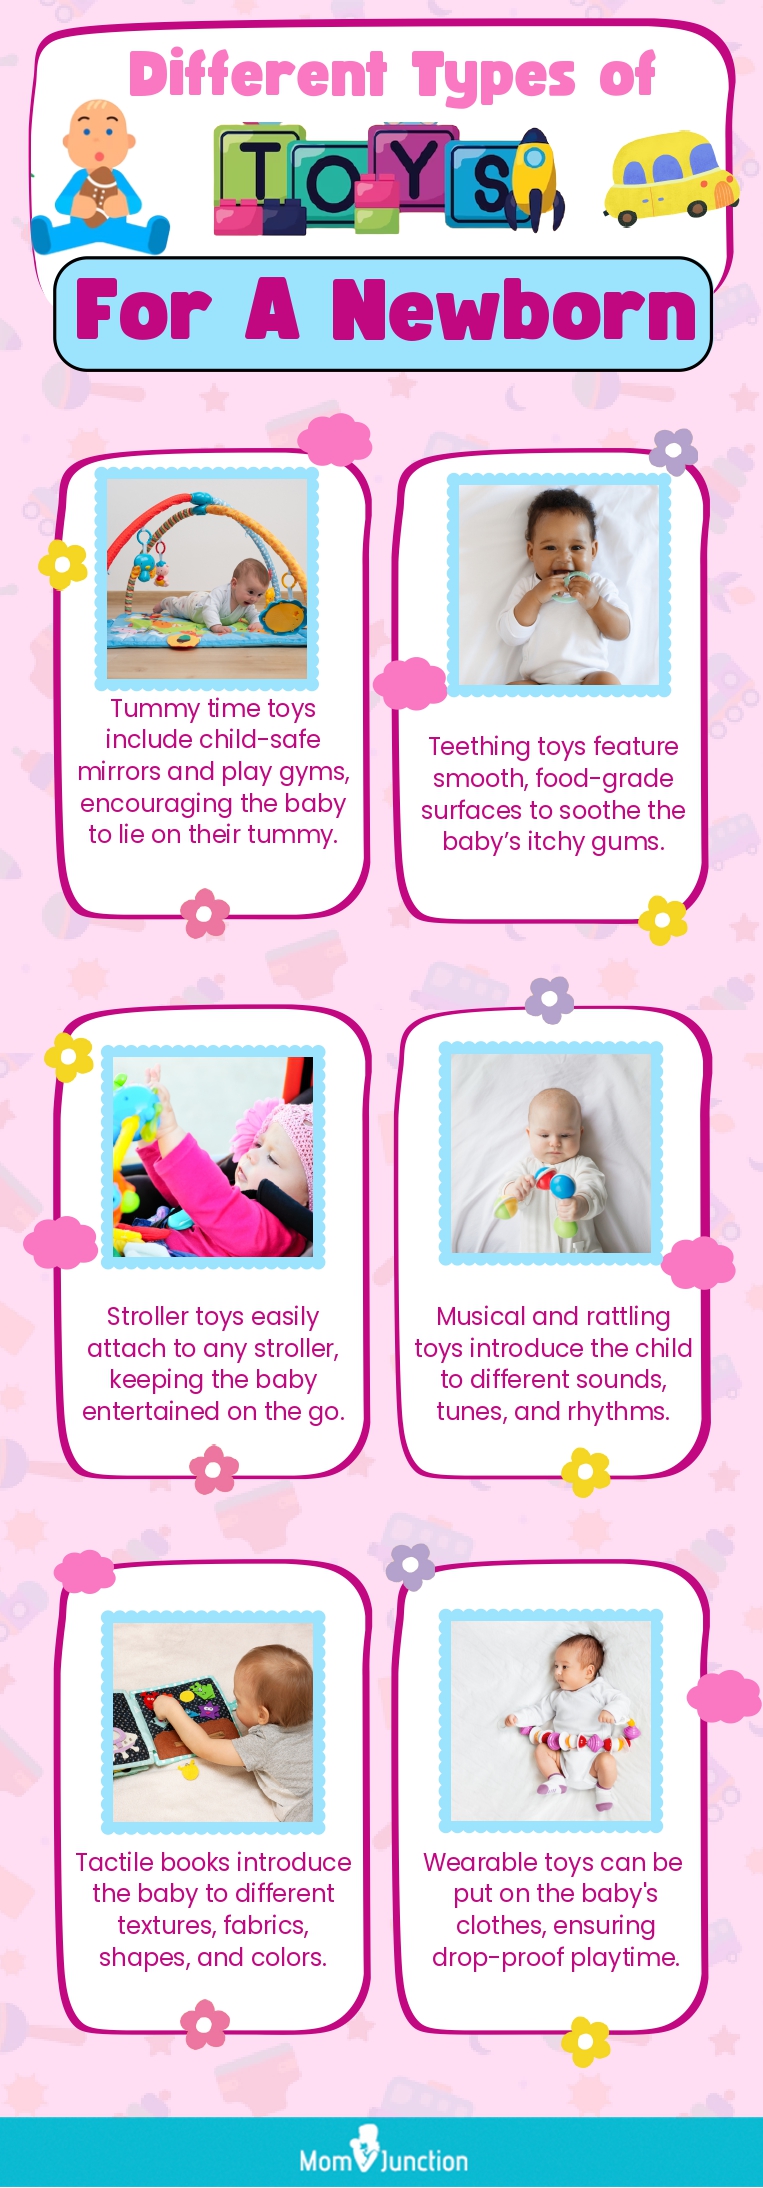 Different Types Of Toys For A Newborn (infographic)